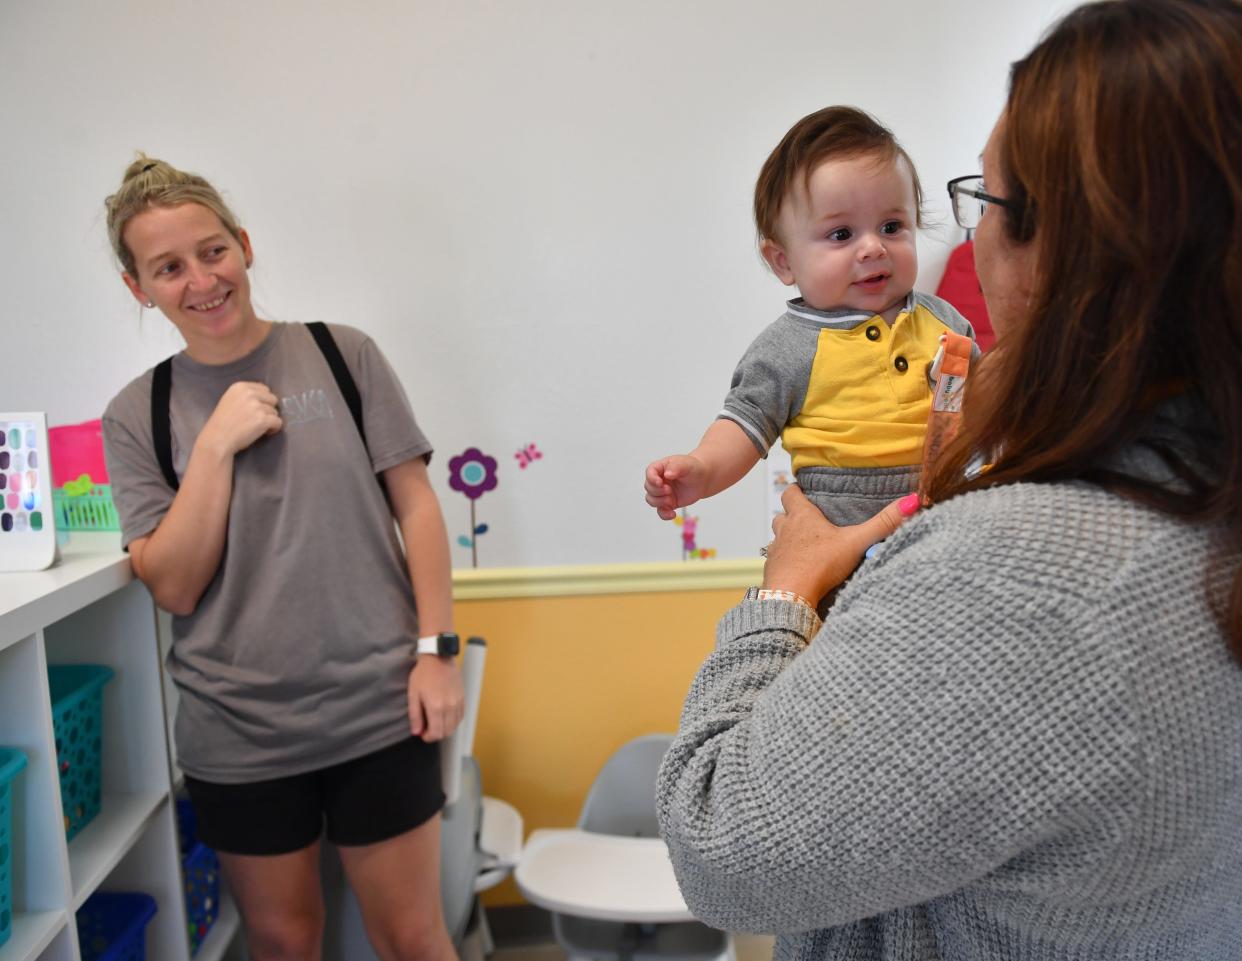 Becca Foy of Palmetto, left, drops her son, Zander, 6 months, off with Laurie McCracken, right, at the new Baby Fox Academy childcare in Lakewood Ranch on Tuesday, July 12, 2022.  McCracken, owner and executive director of Baby Fox Academy in Sarasota, opened a new childcare location in Lakewood Ranch in the first week of July and is already at fifty-percent capacity. 